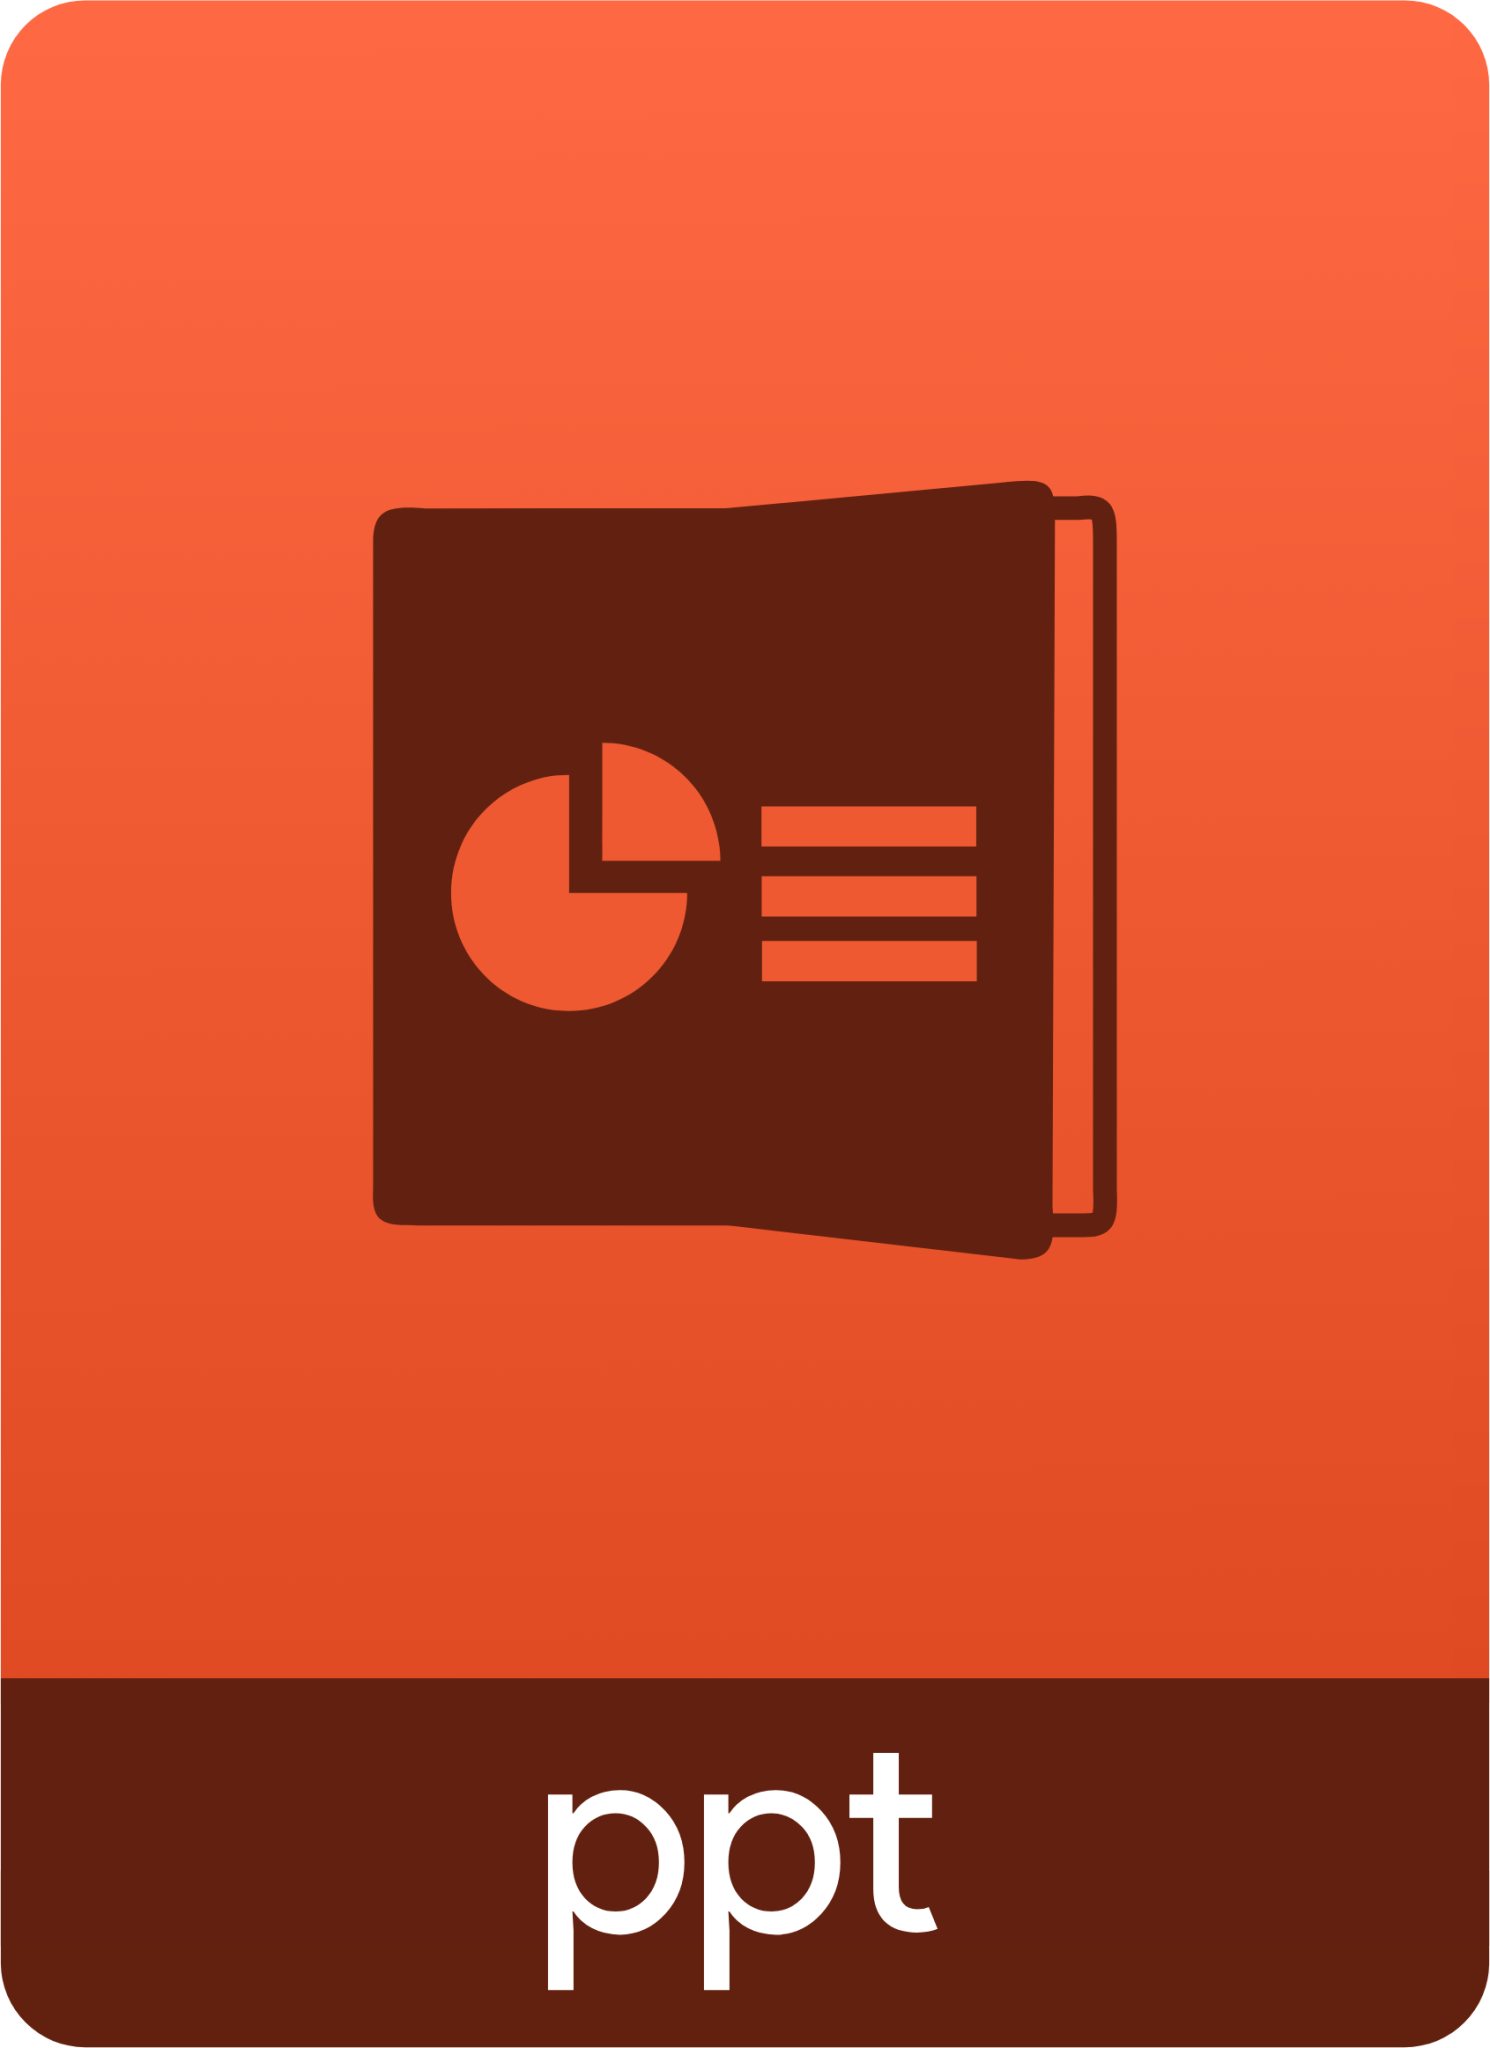 application vnd ms powerpoint icon